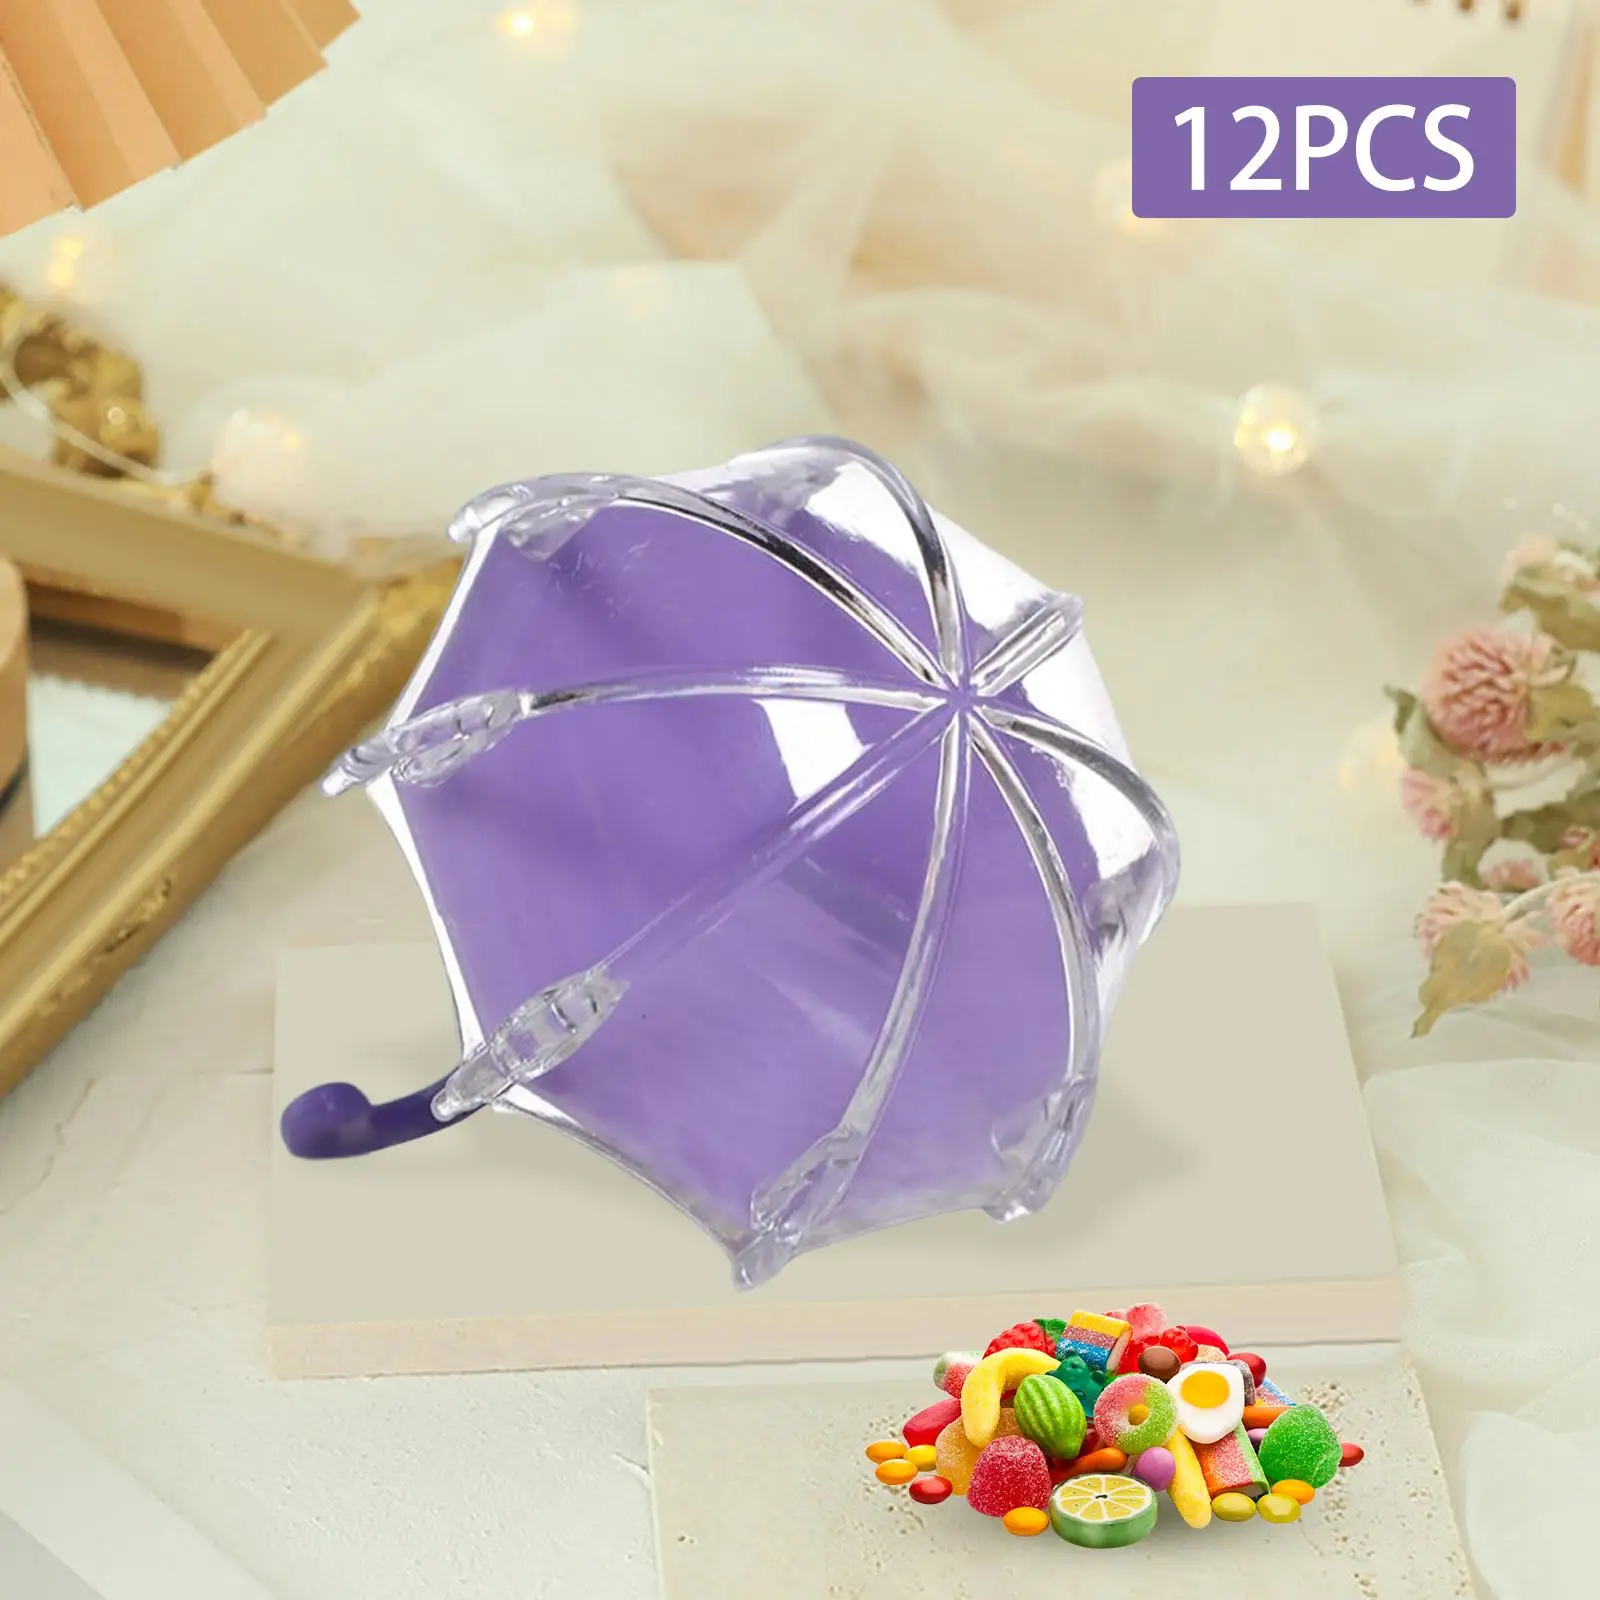 12pcs Mini Umbrella Shape Candy Boxes Clear Gifts Boxes Birthday Party Favors Wedding Engagement Children`s Day Decoration